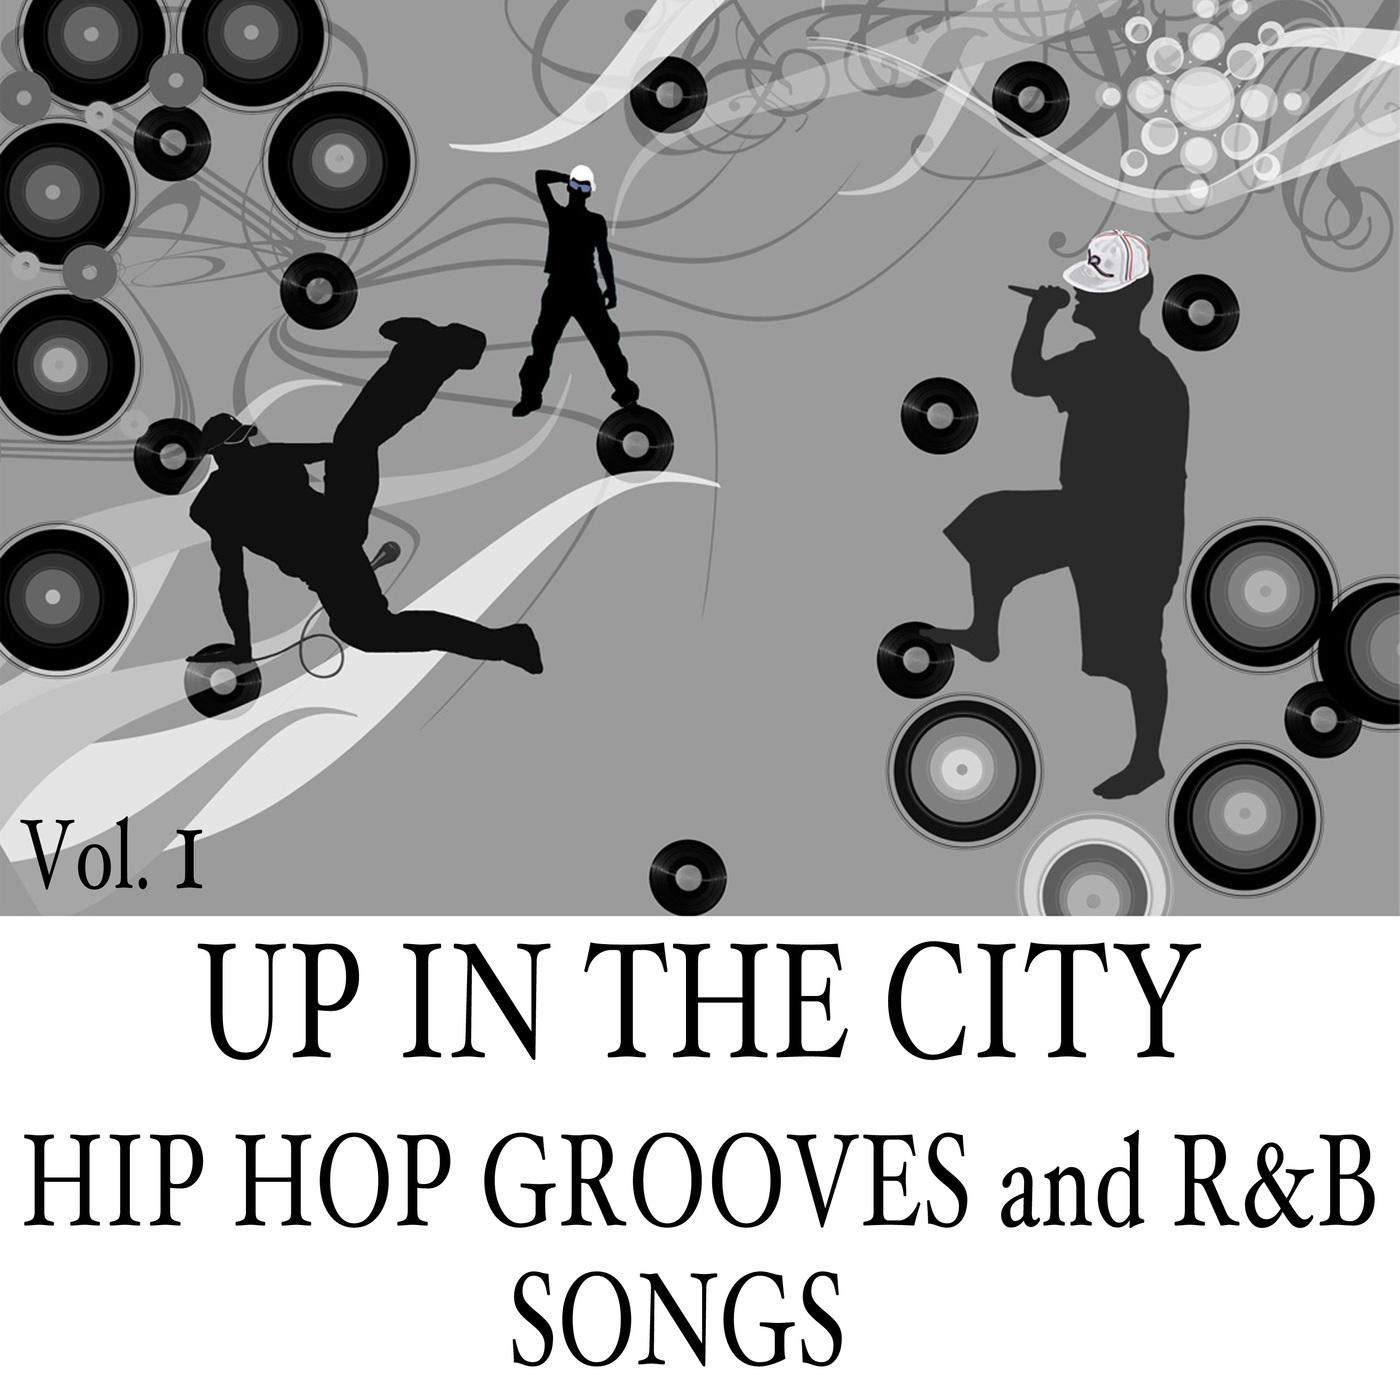 Up in the City: Hip Hop Grooves and R&B Songs, Vol. 1